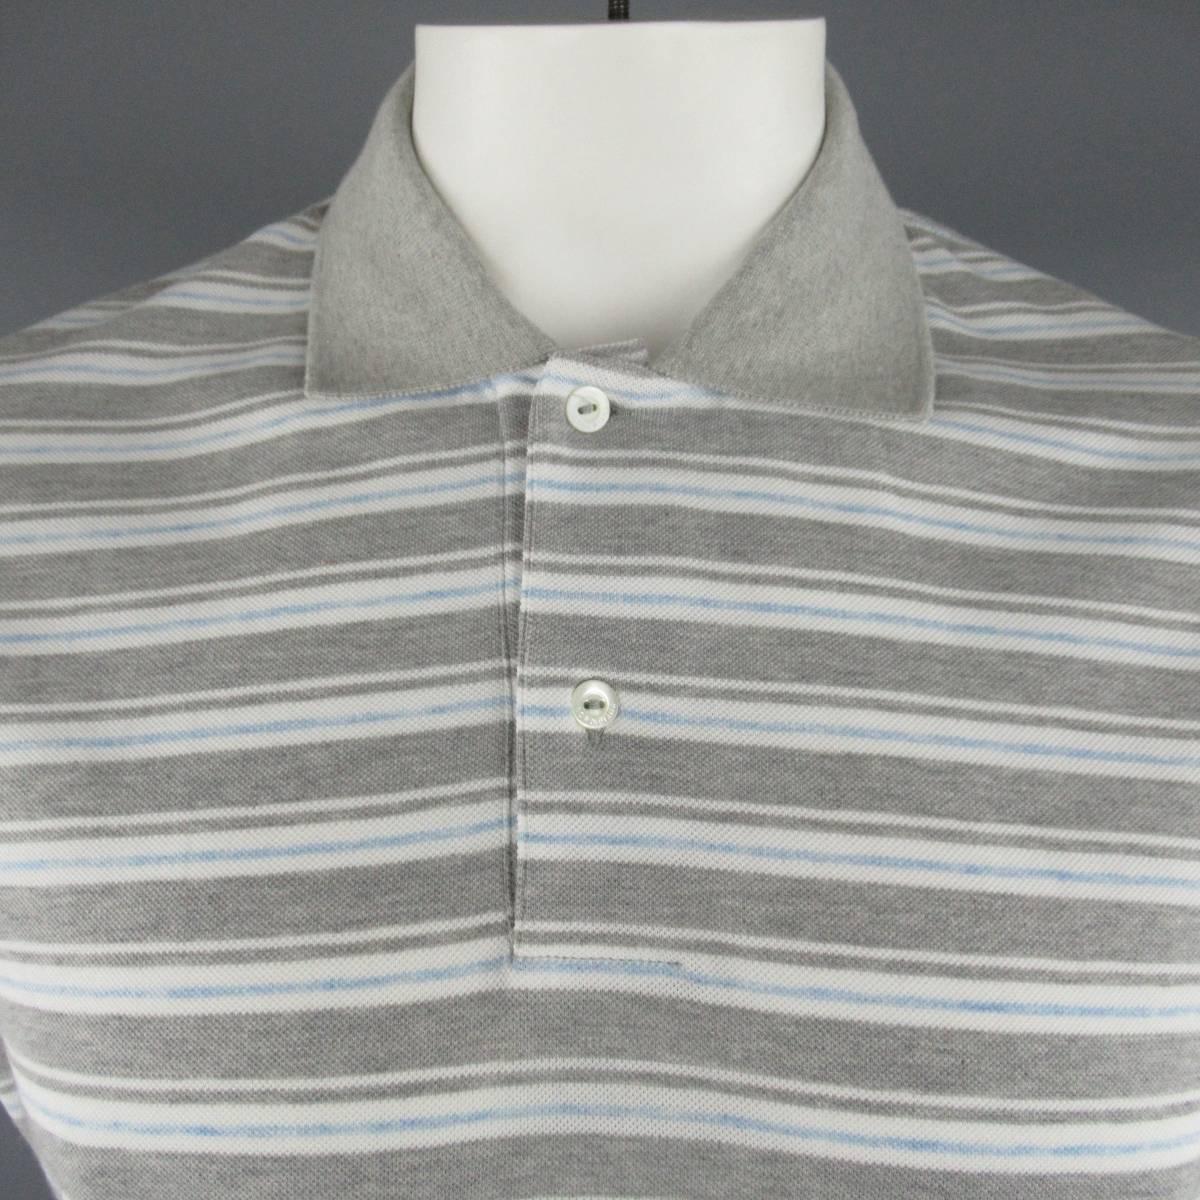 LORO PIANA polo comes in light Heather gray, white, and light blue striped cotton pique with contrast collar. Made in Italy.
 
New with tags.
Marked: XXL
 
Measurements:
 
Shoulder: 17 in.
Chest: 48 in.
Sleeve: 9.5 in.
Length: 28.5 in.

SKU: 84031